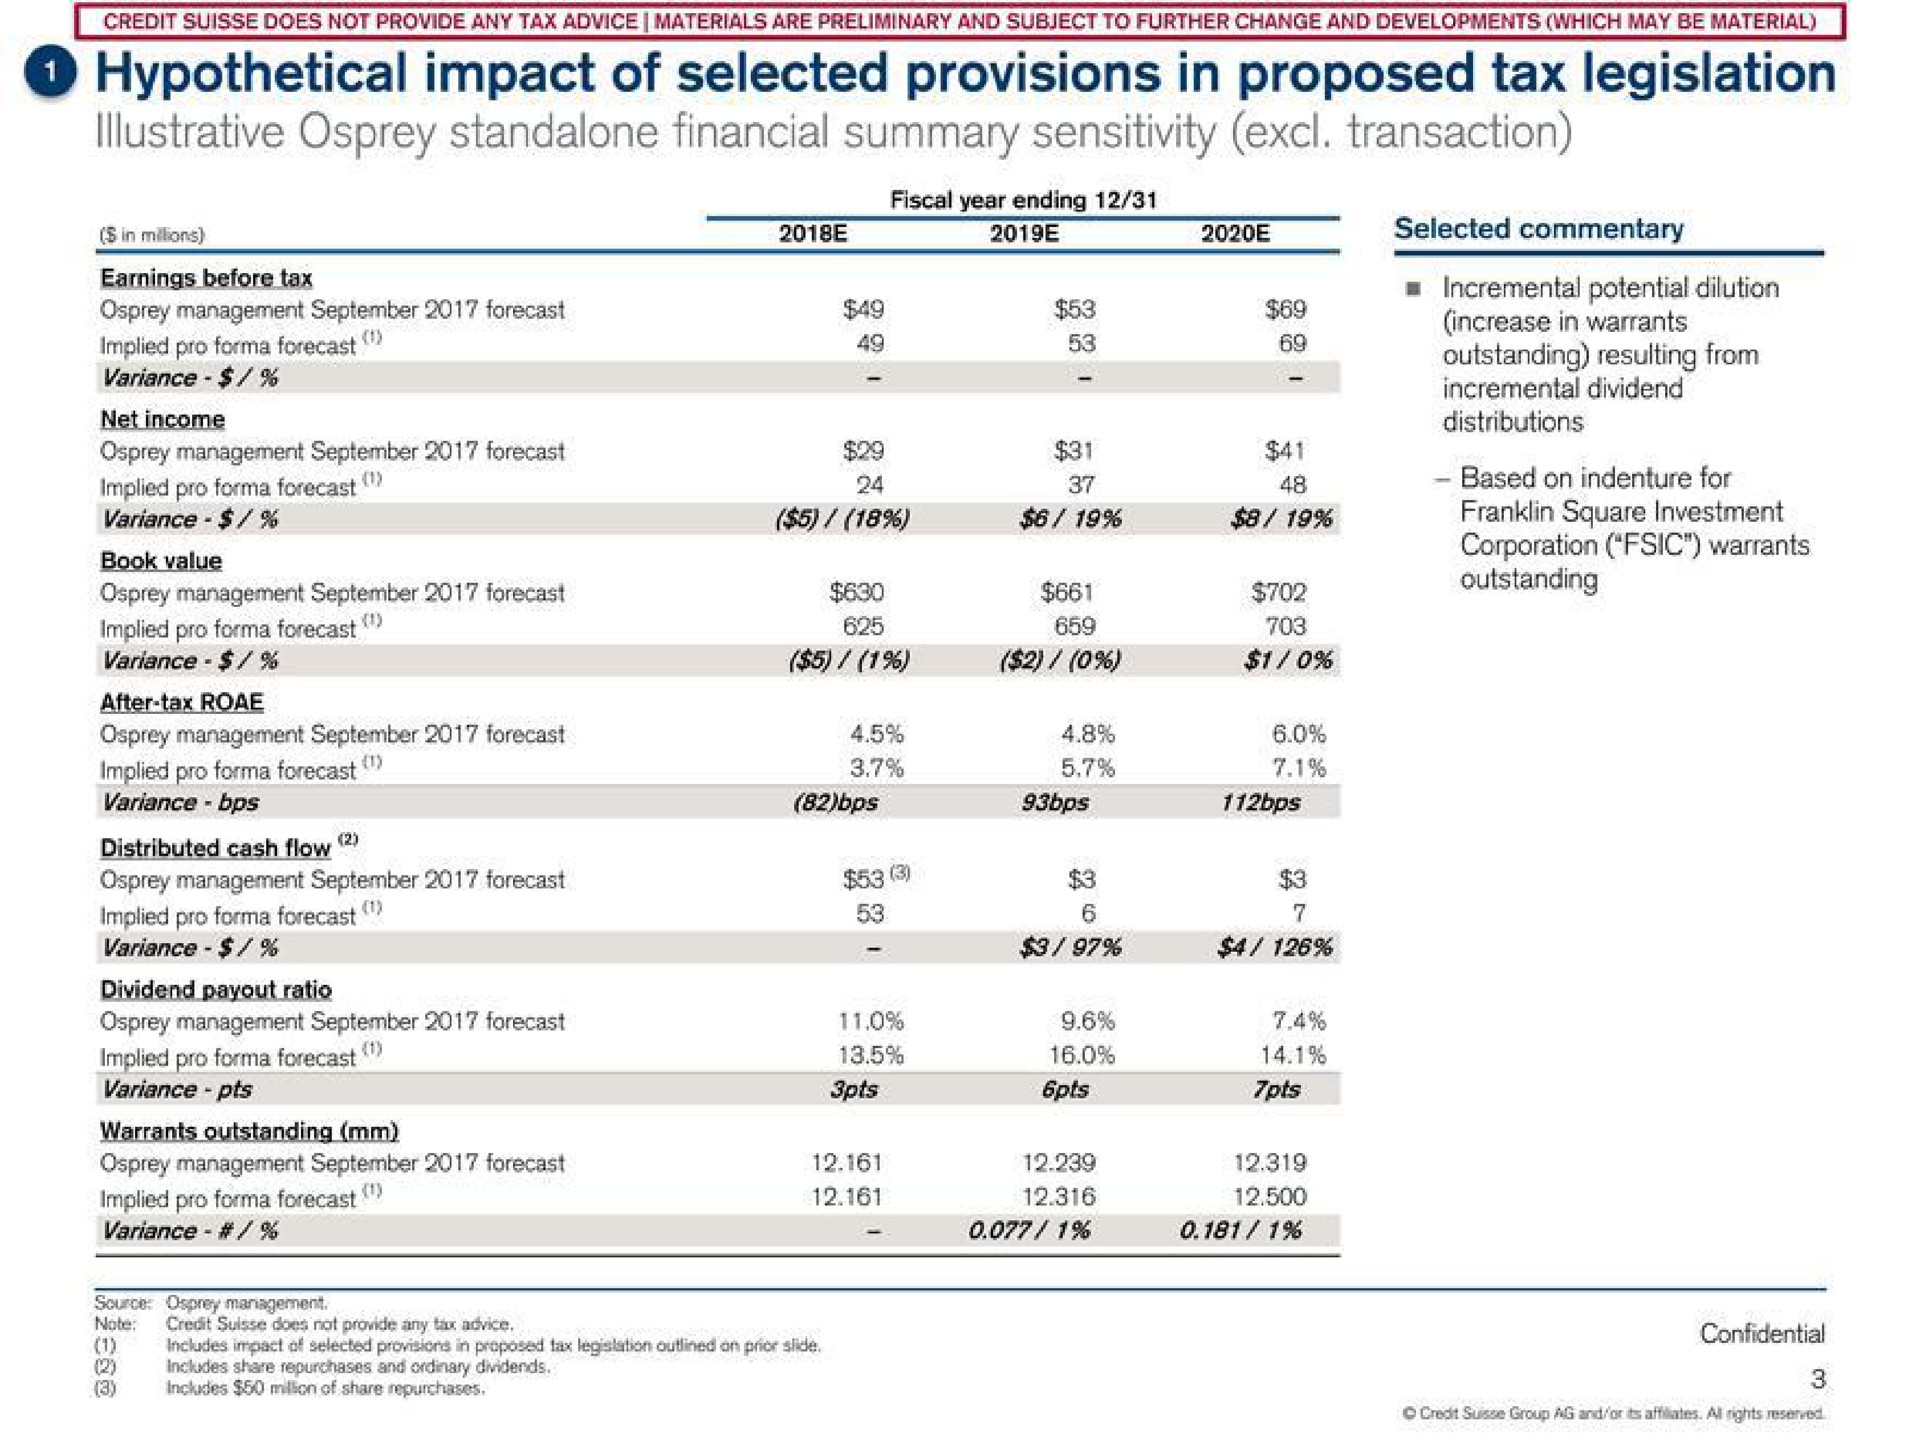 hypothetical impact of selected provisions in proposed legislation osprey financial summary sensitivity transaction | Credit Suisse